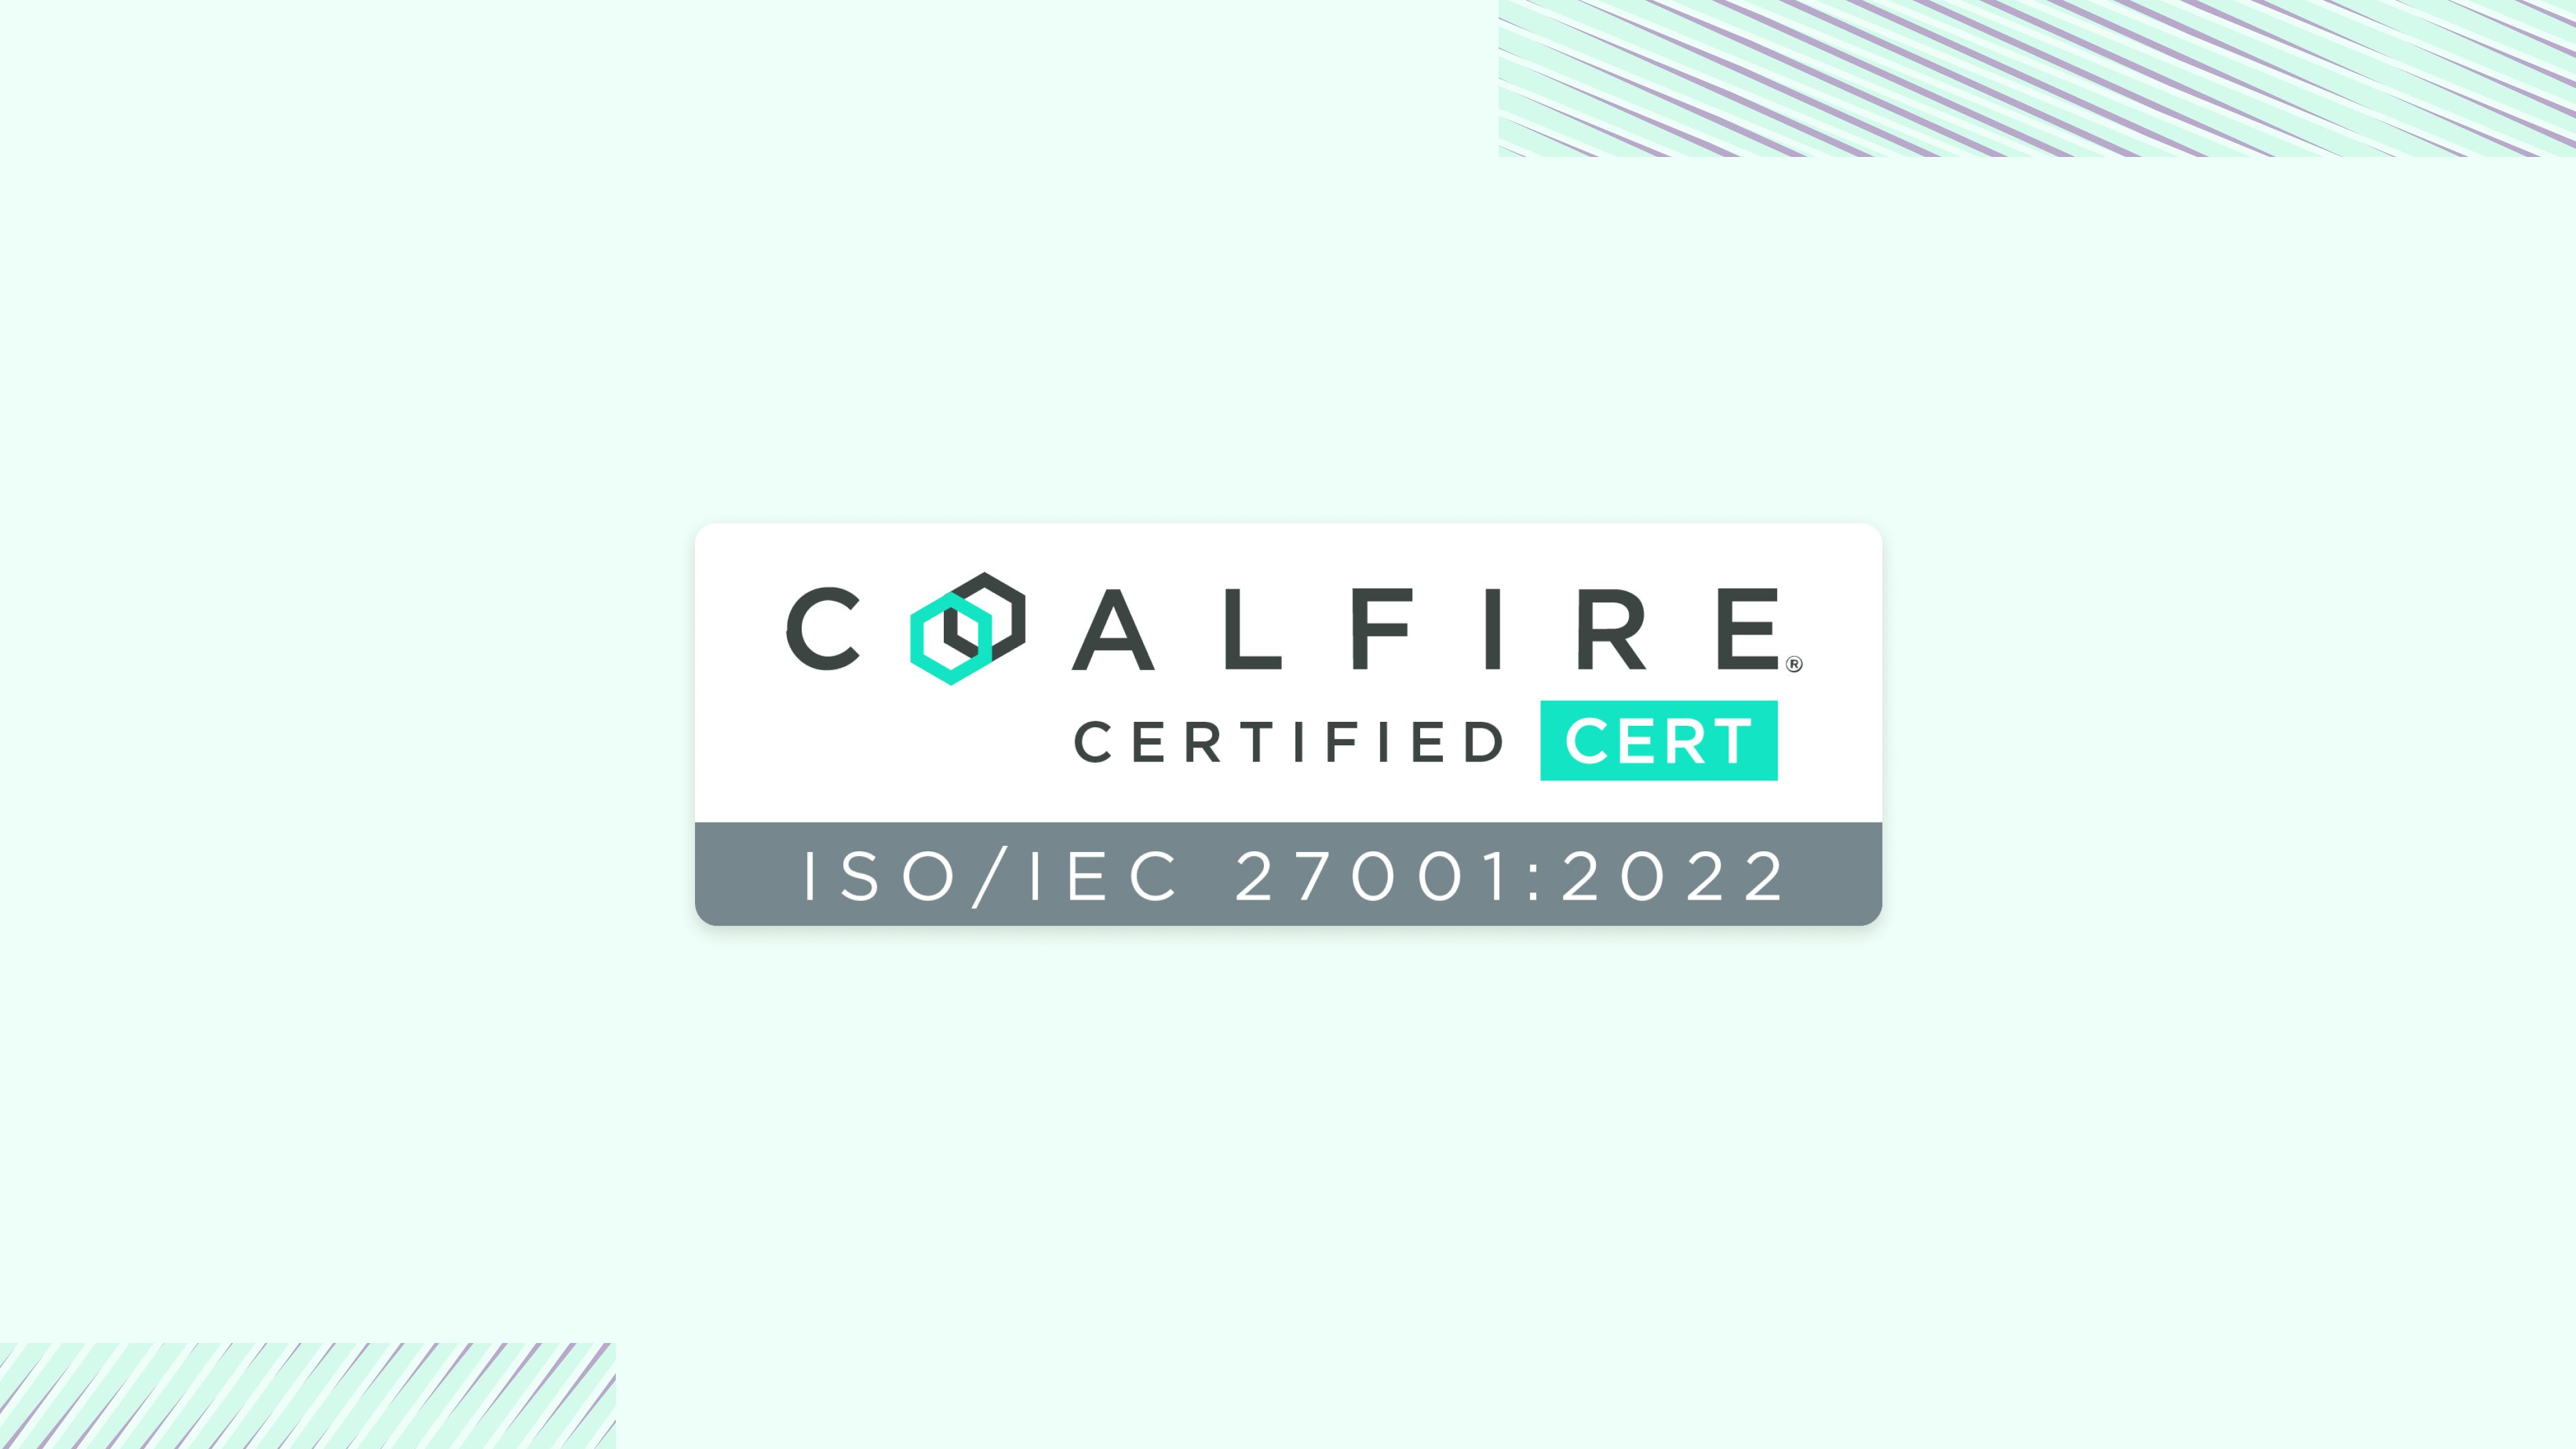 Veriff obtains the latest ISO/IEC 27001 certification